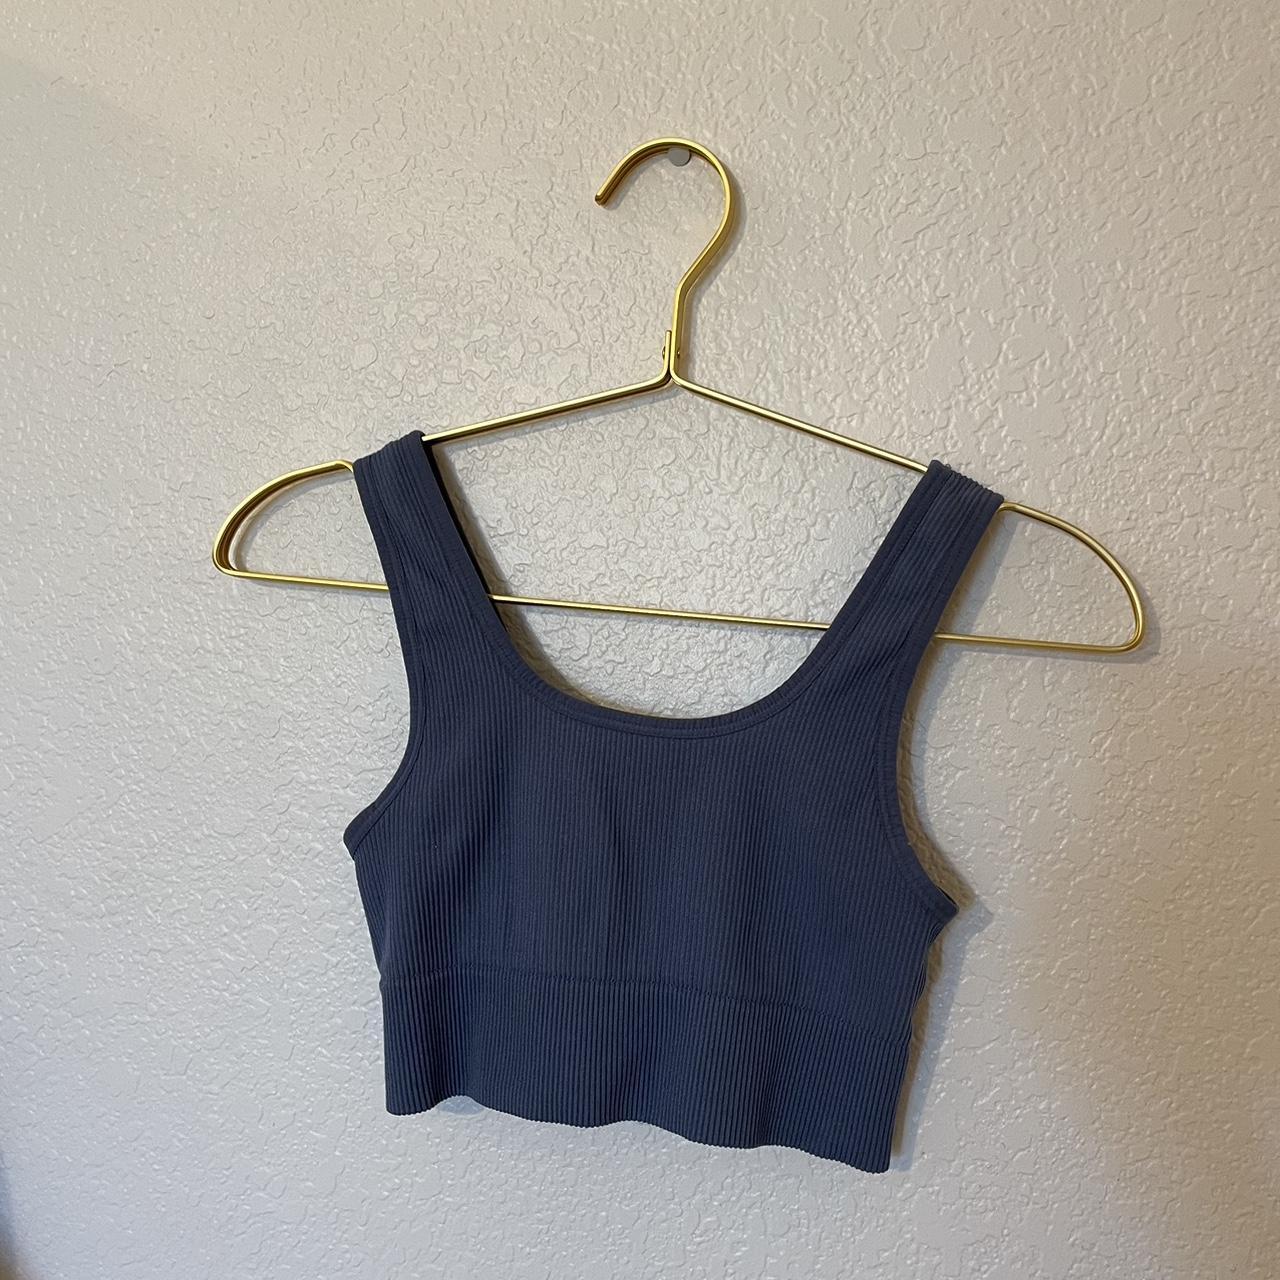 Avia bra top!! size m worn once, no flaws, in great - Depop